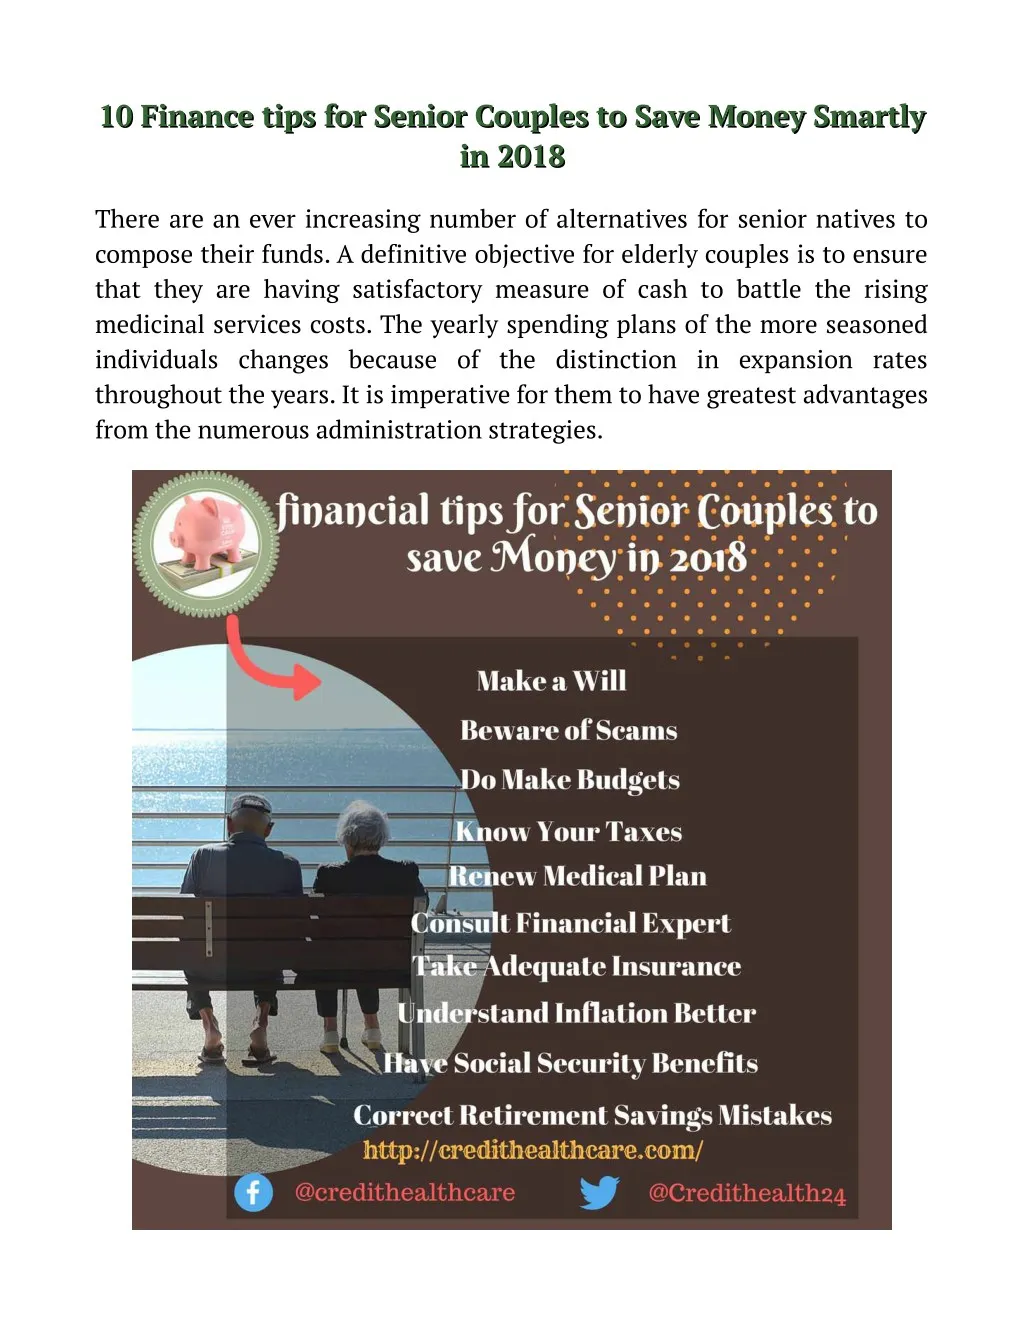 10 finance tips for senior couples to save money